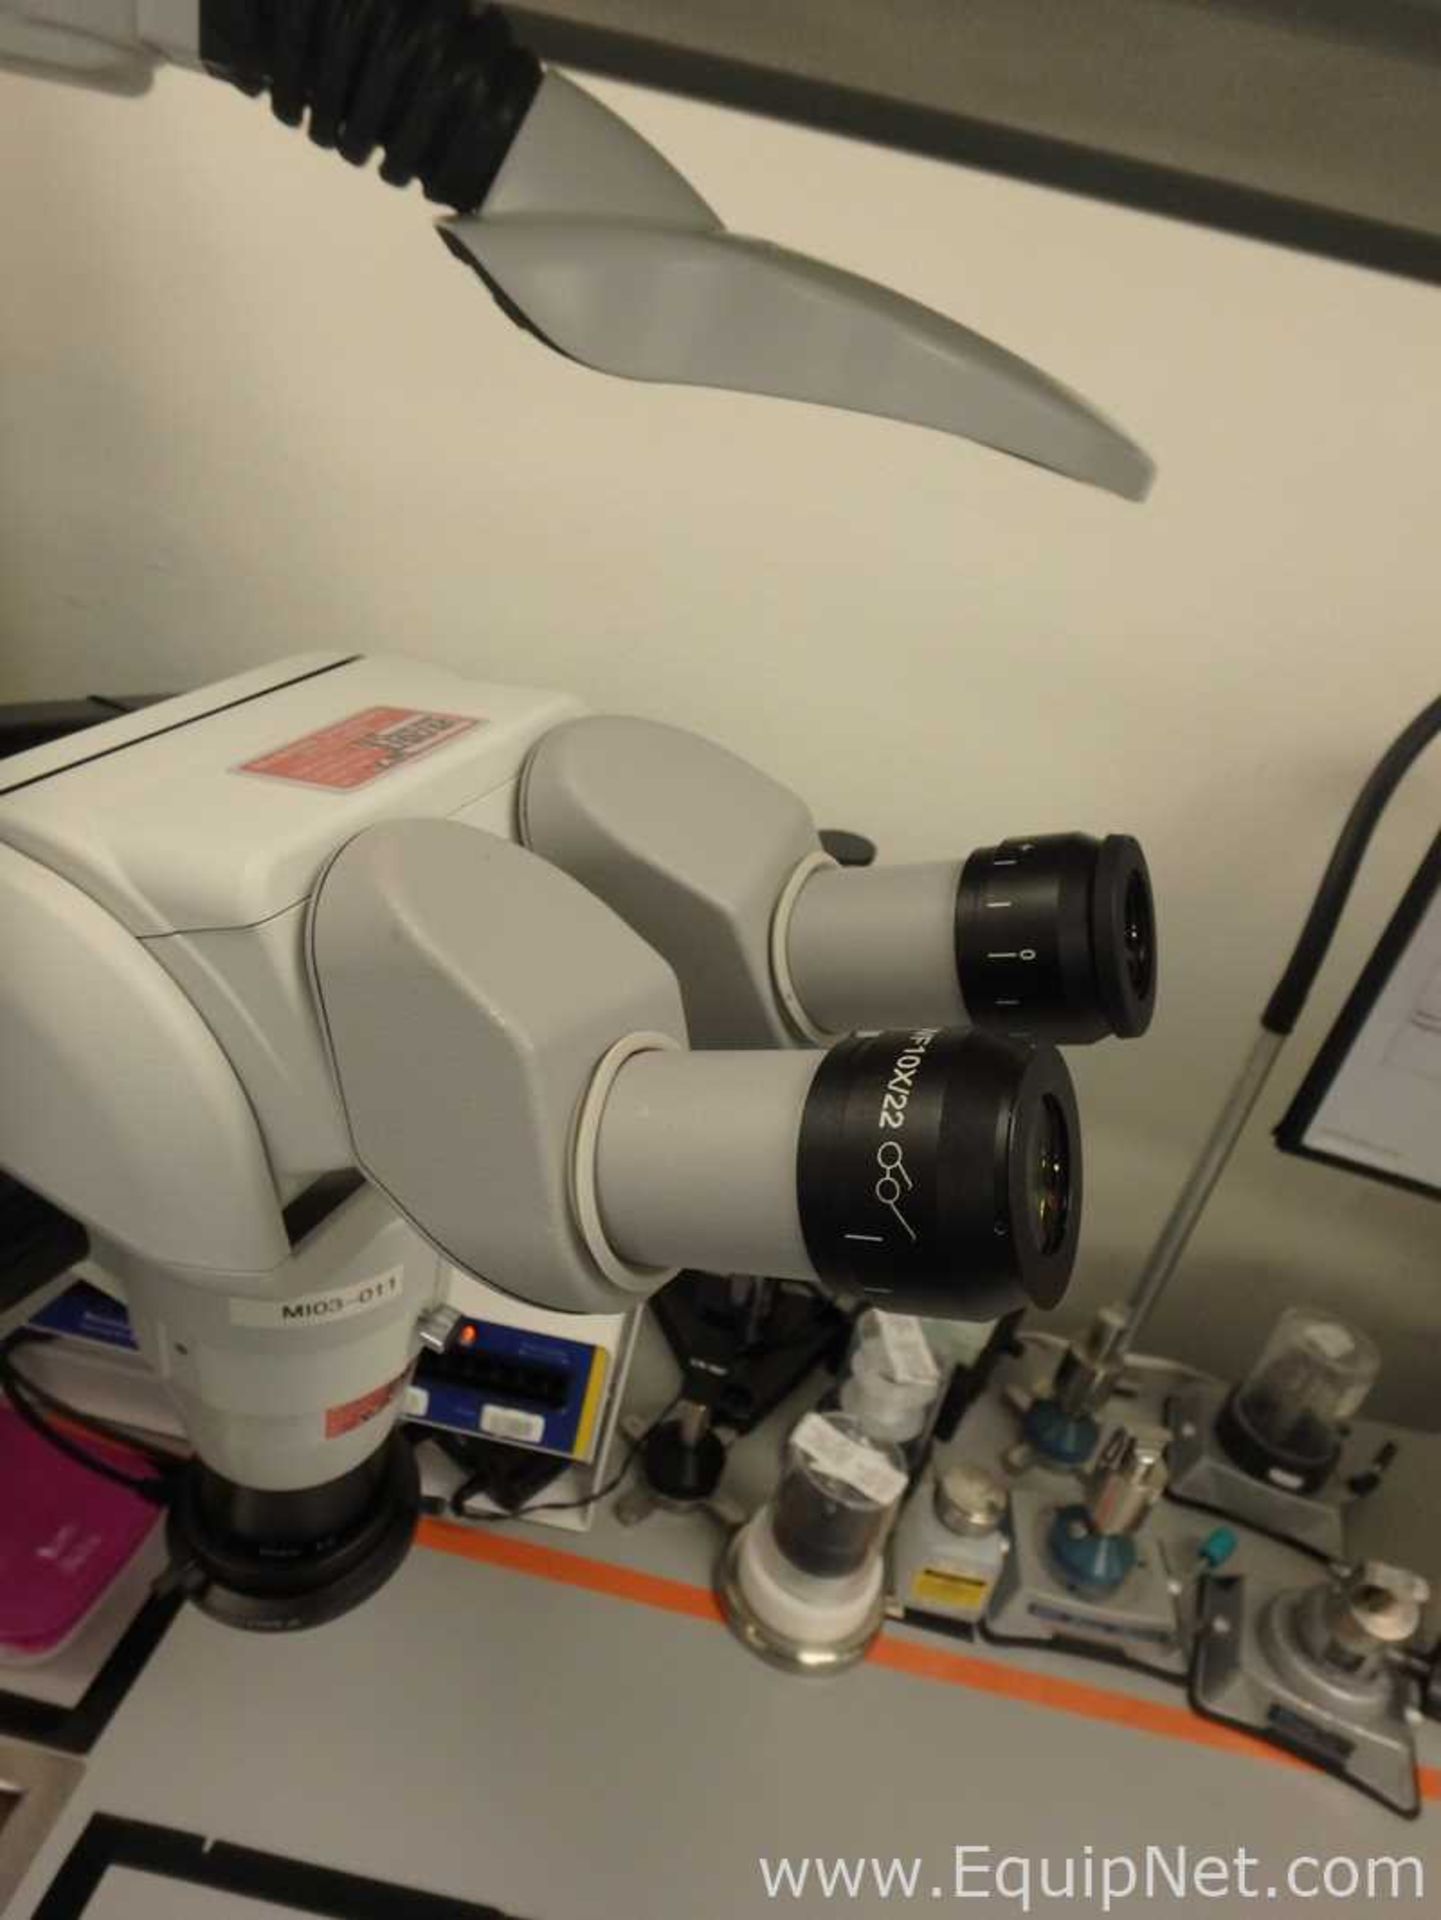 Boom Mounted Stereo Microscope - Image 5 of 12